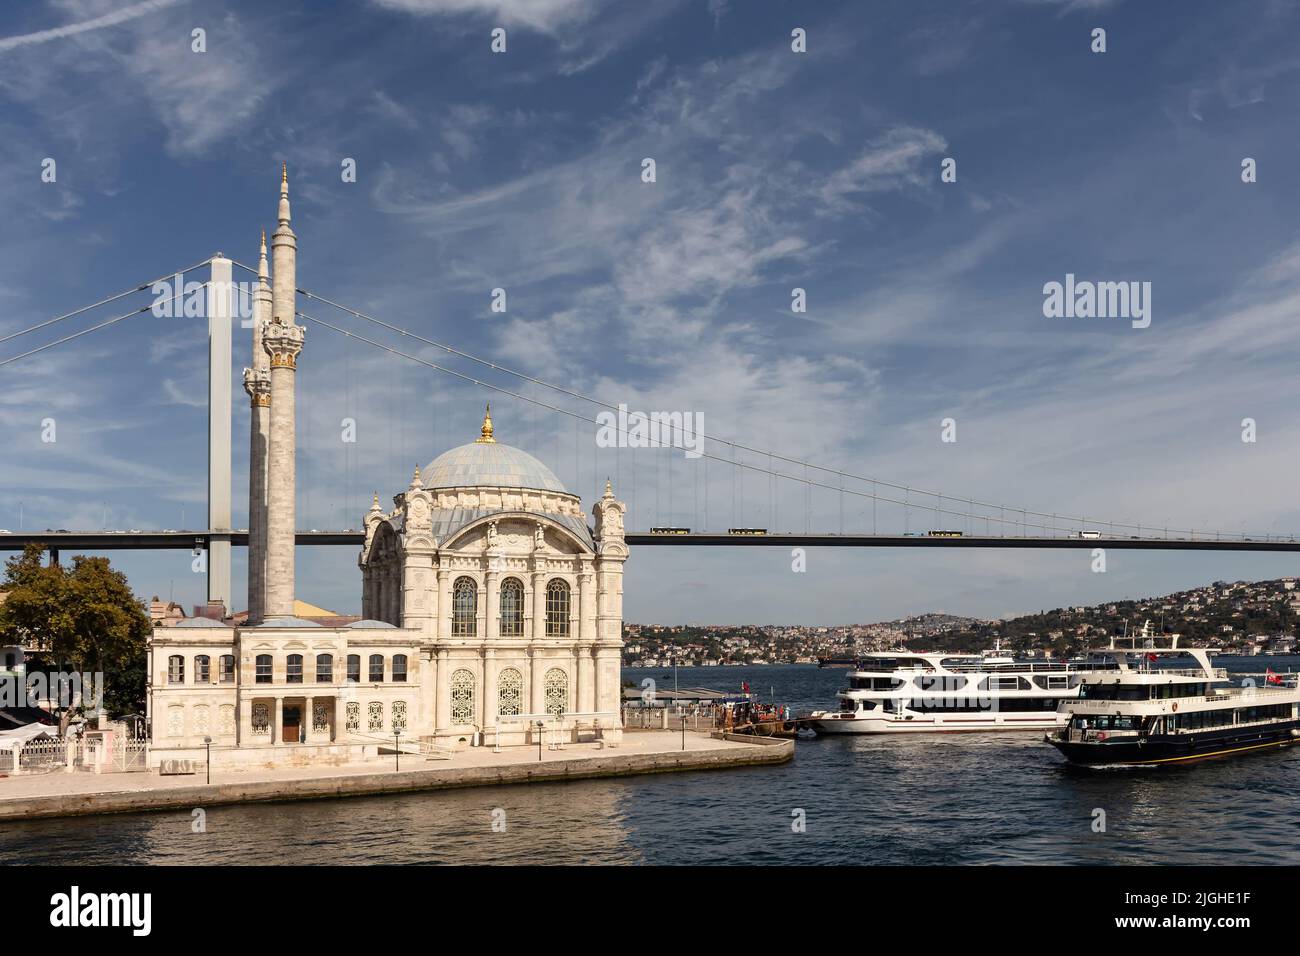 View of cruise tour boats on Bosphorus, historical Ortakoy mosque and bridge in Istanbul. It is a sunny summer day. Stock Photo